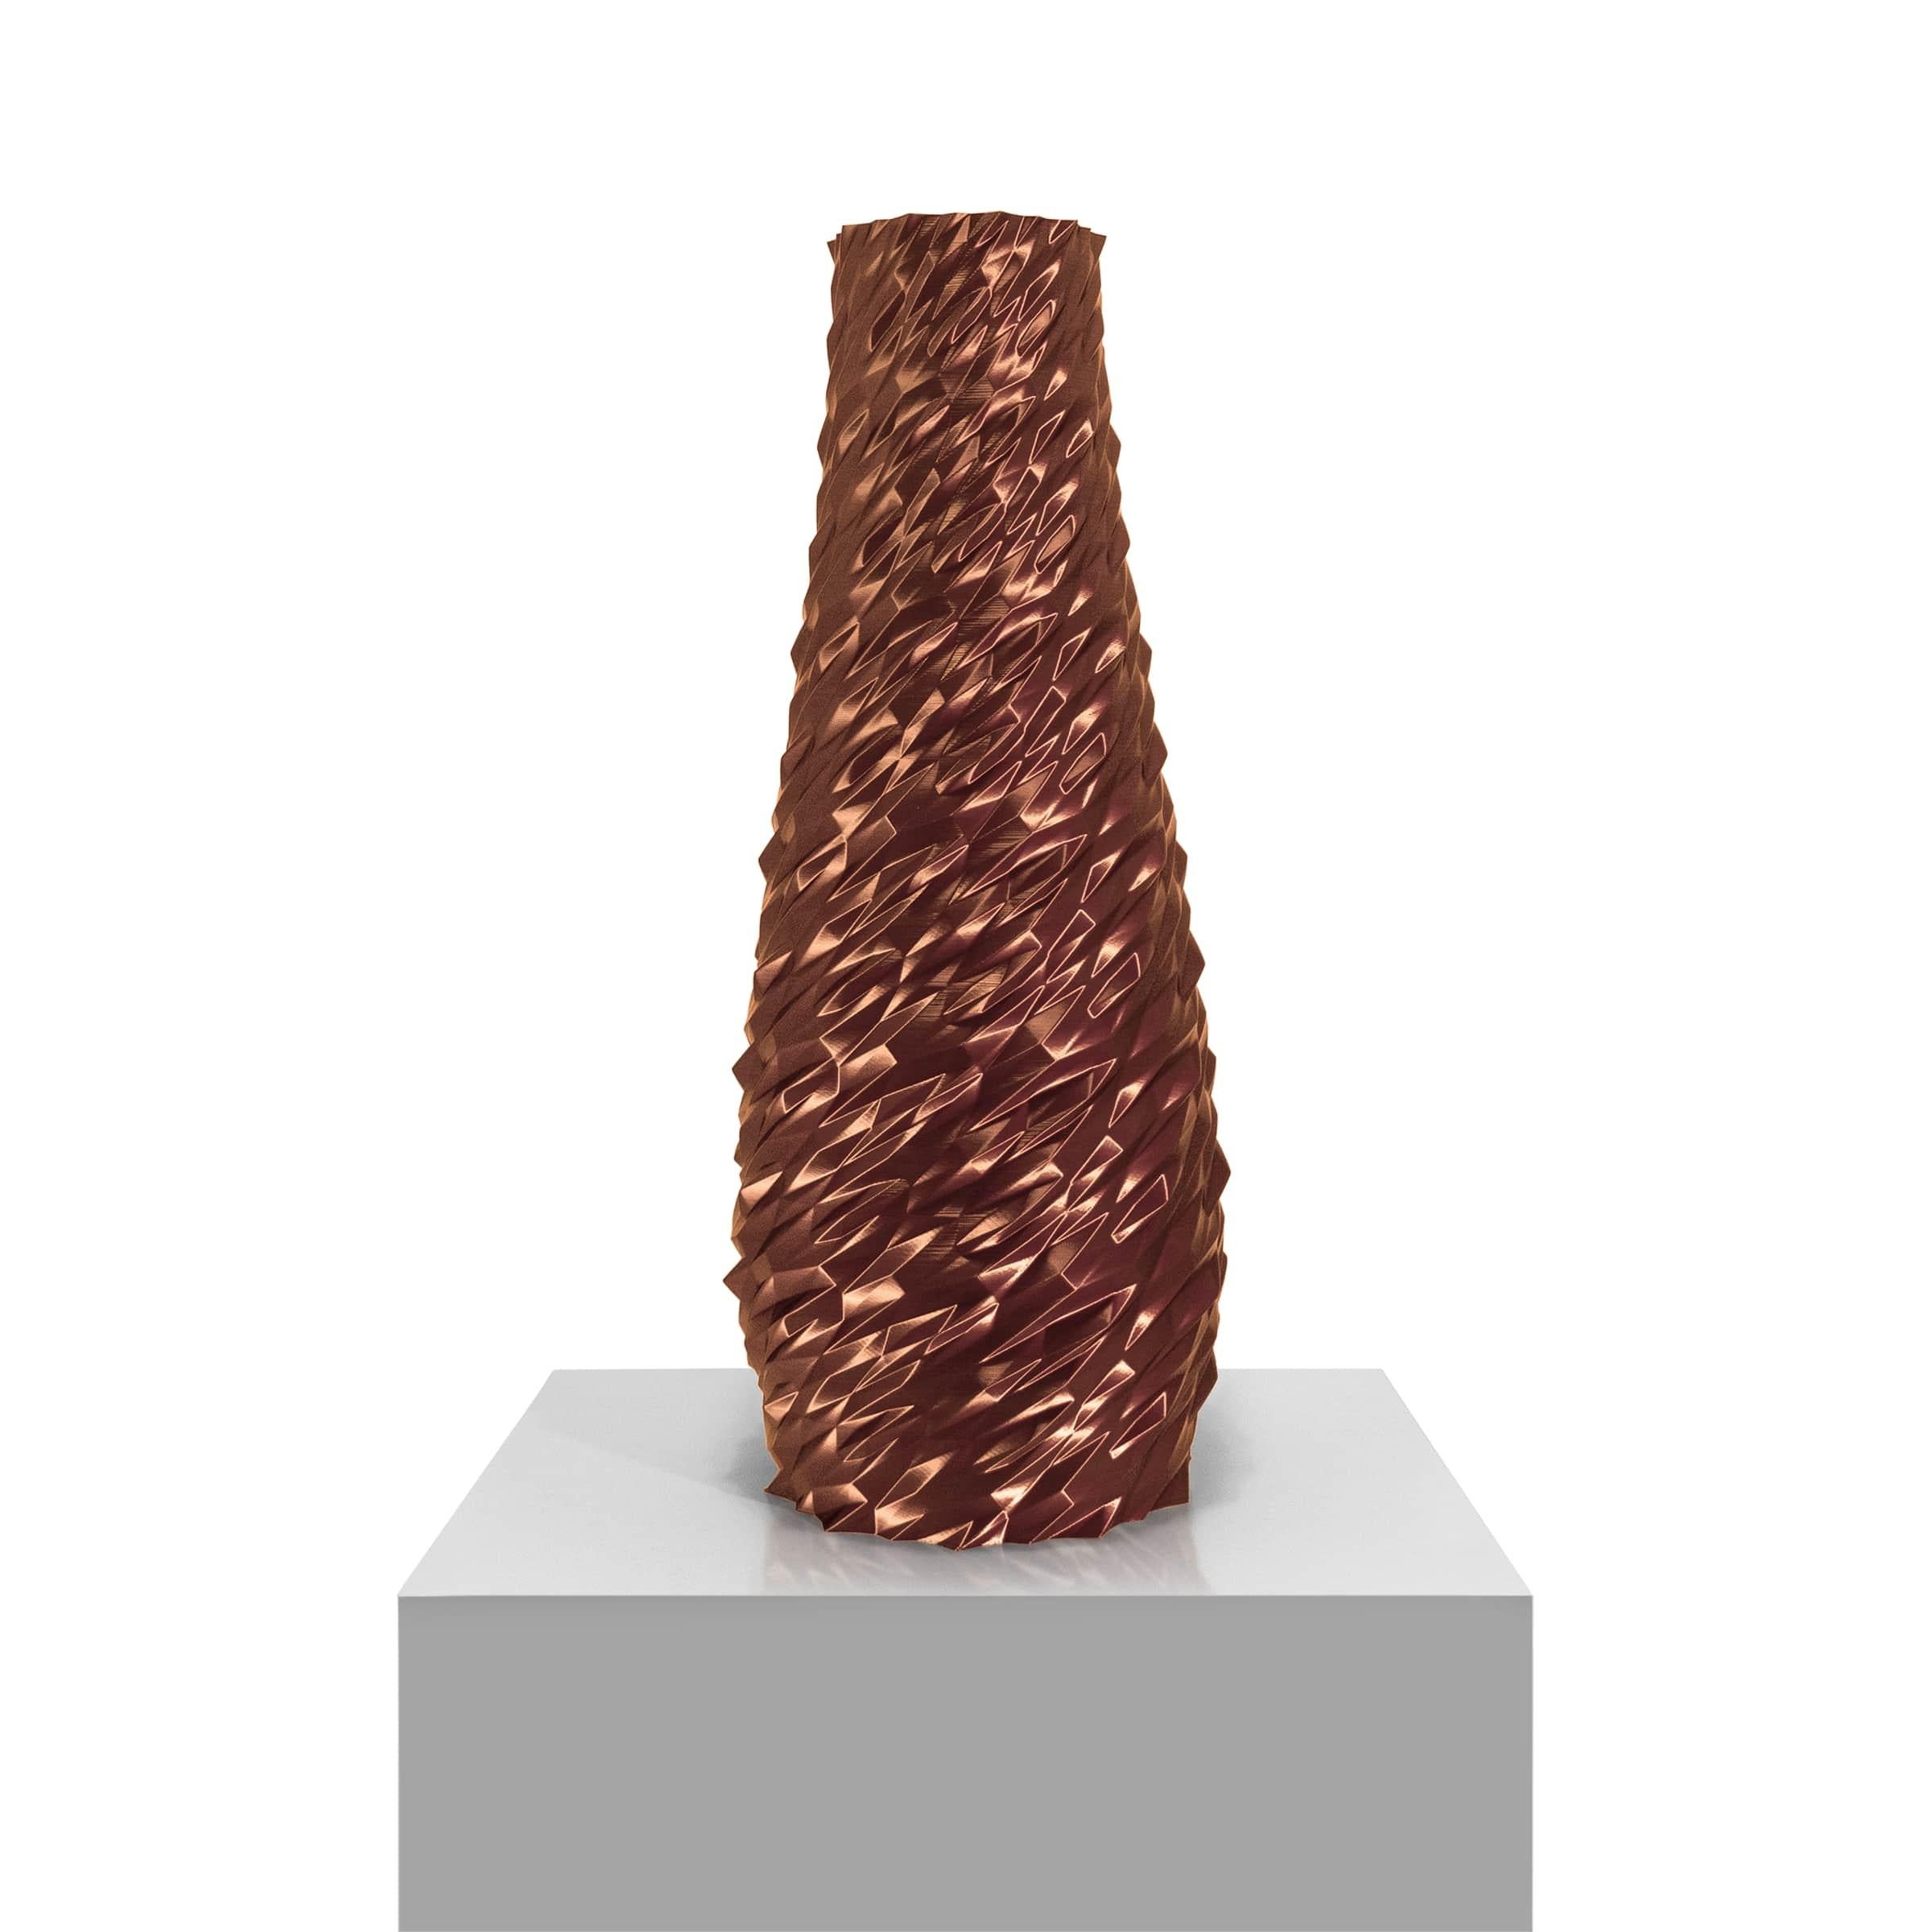 Vase-Sculpture by DygoDesign
Inspired by the textured and brilliant coat of a majestic dragon, this stupendous sculpture features a dynamic and impressive silhouette that is exquisitely pleasant to the touch. Fashioned of starch following